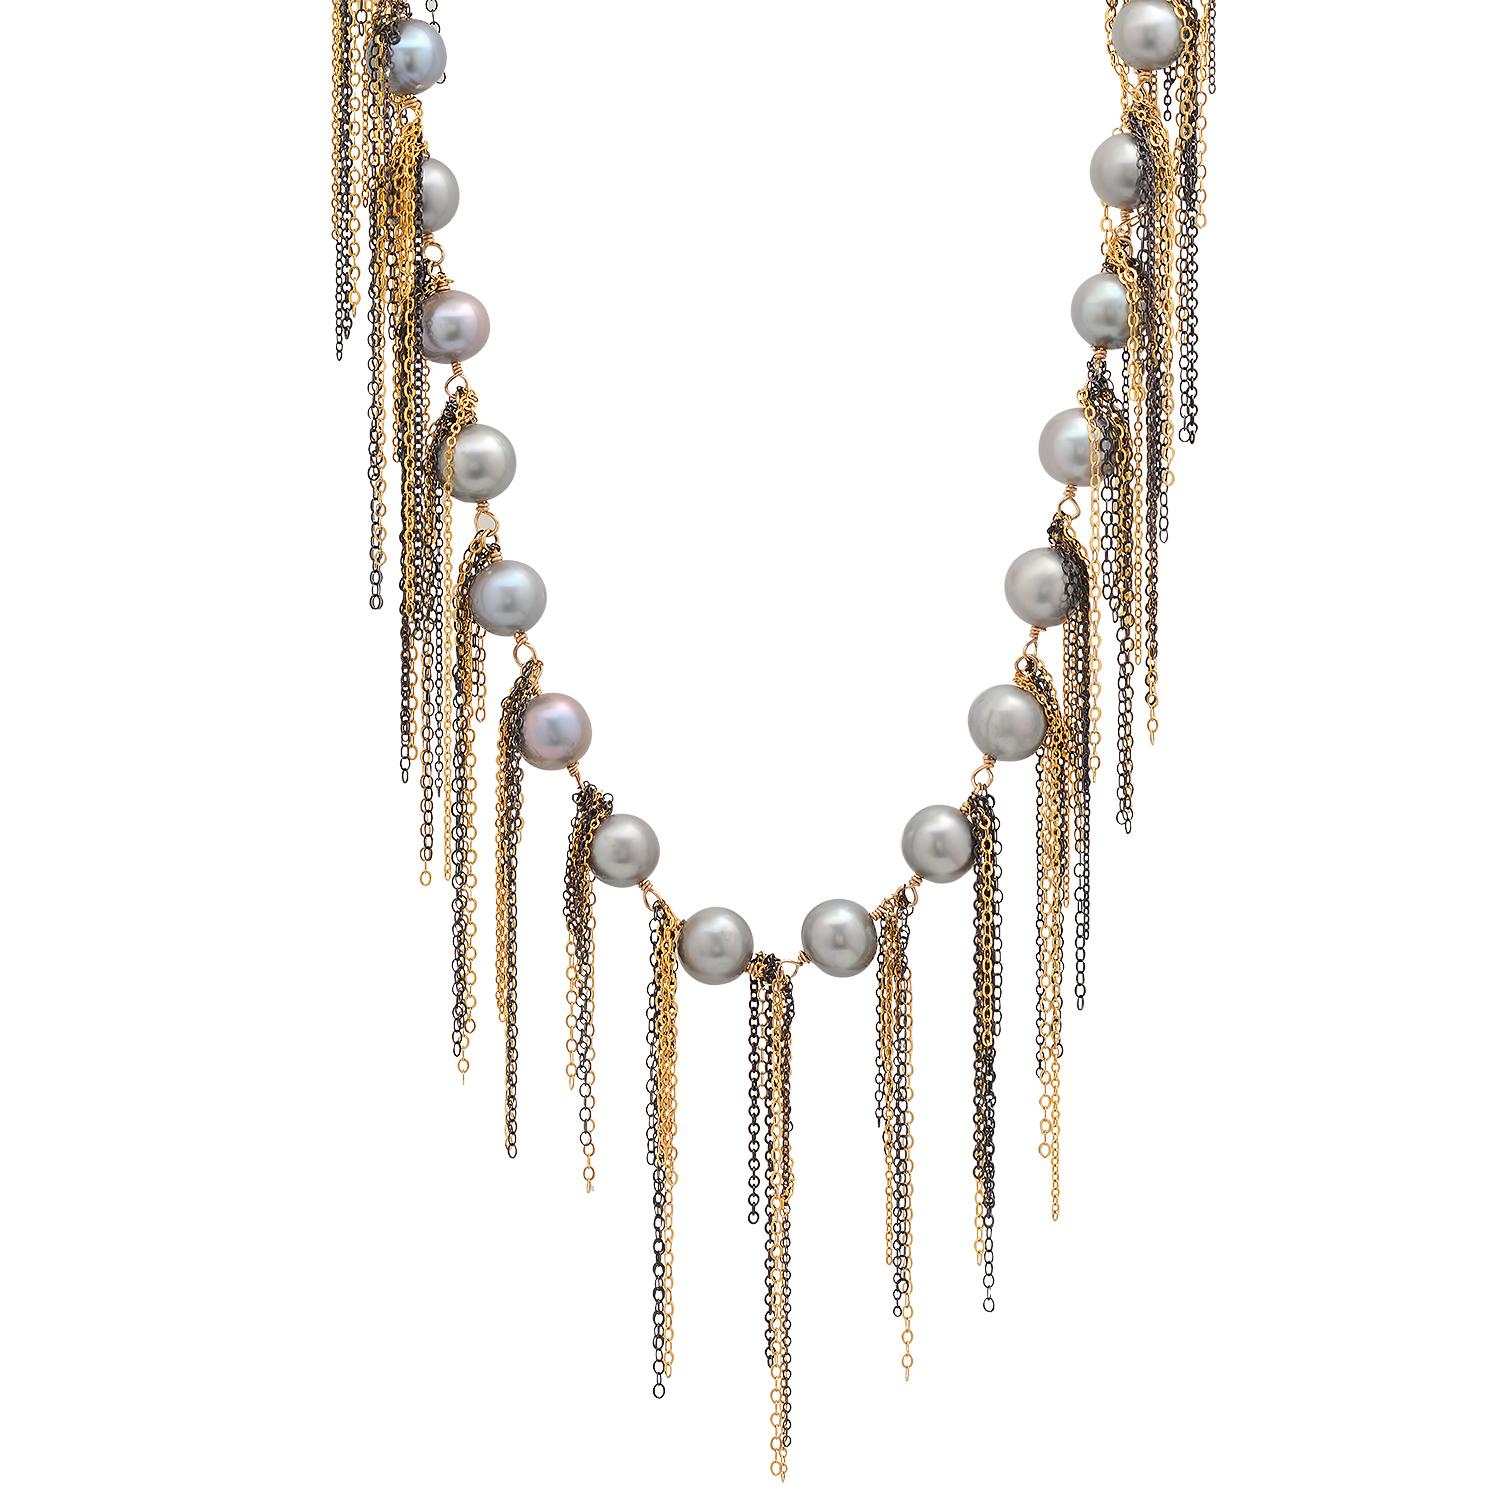 Signature silver freshwater pearl fringe necklace by Los Angeles based fine jewelry designer, Samira 13. Sterling silver, oxidized and gold filled chain. Can be worn many ways. 62